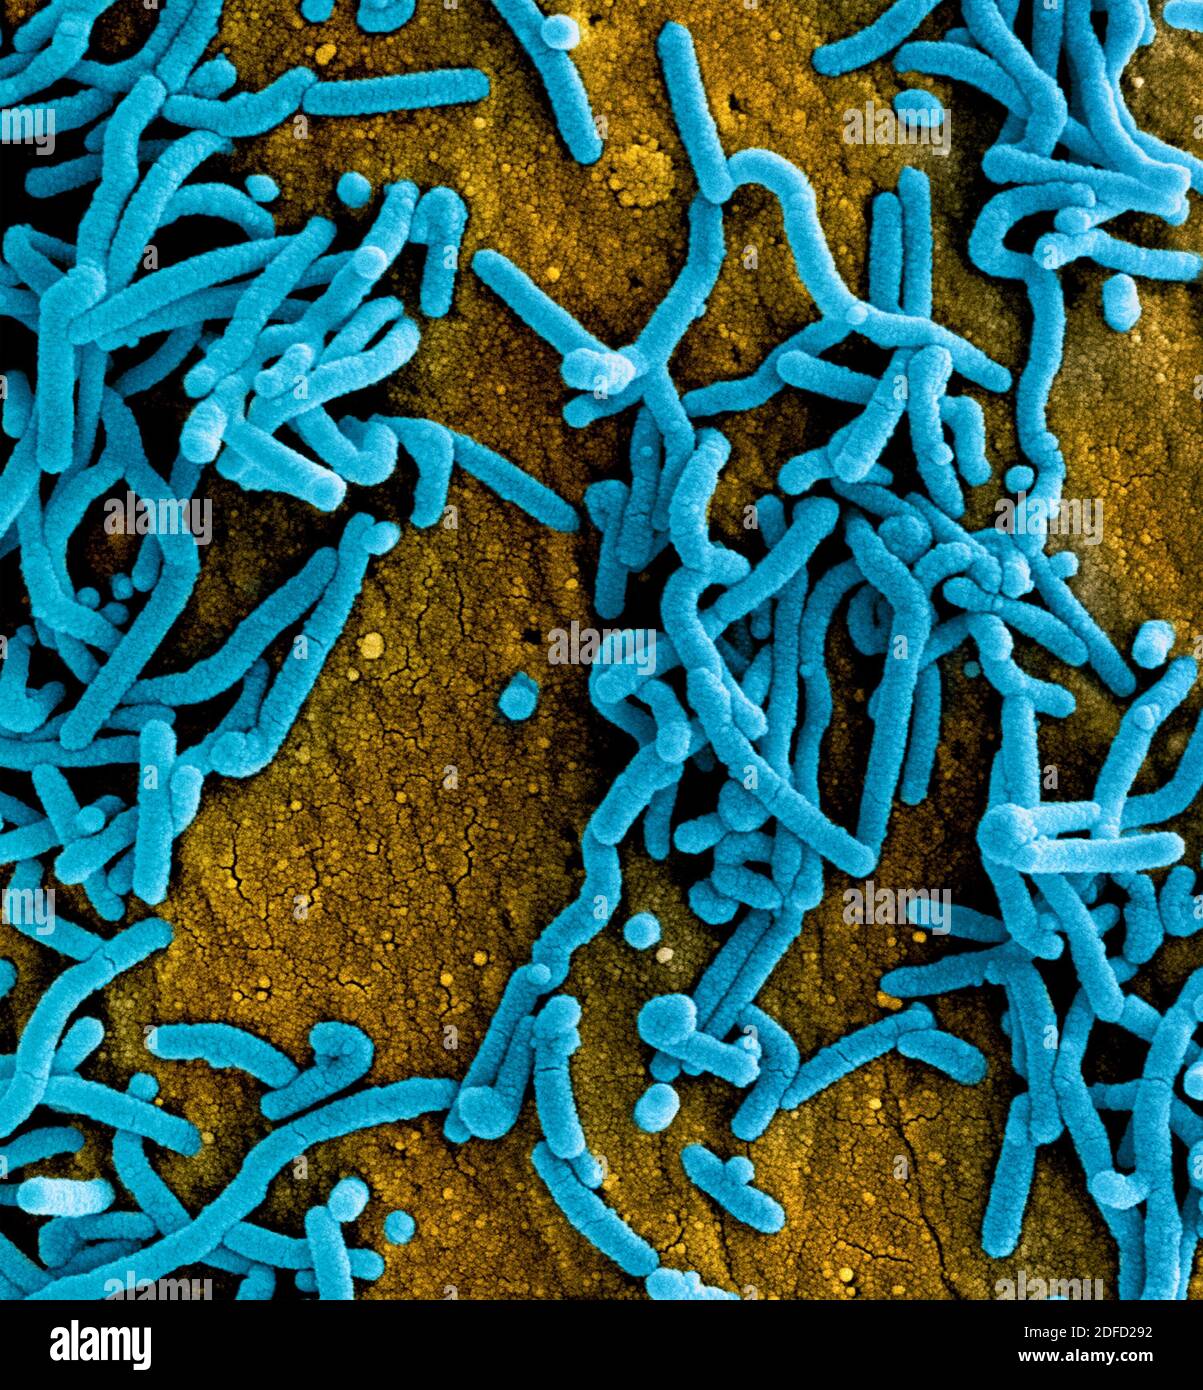 Colorized scanning electron micrograph of Marburg virus particles (blue) both budding and attached to the surface of infected VERO E6 cells (orange). Stock Photo